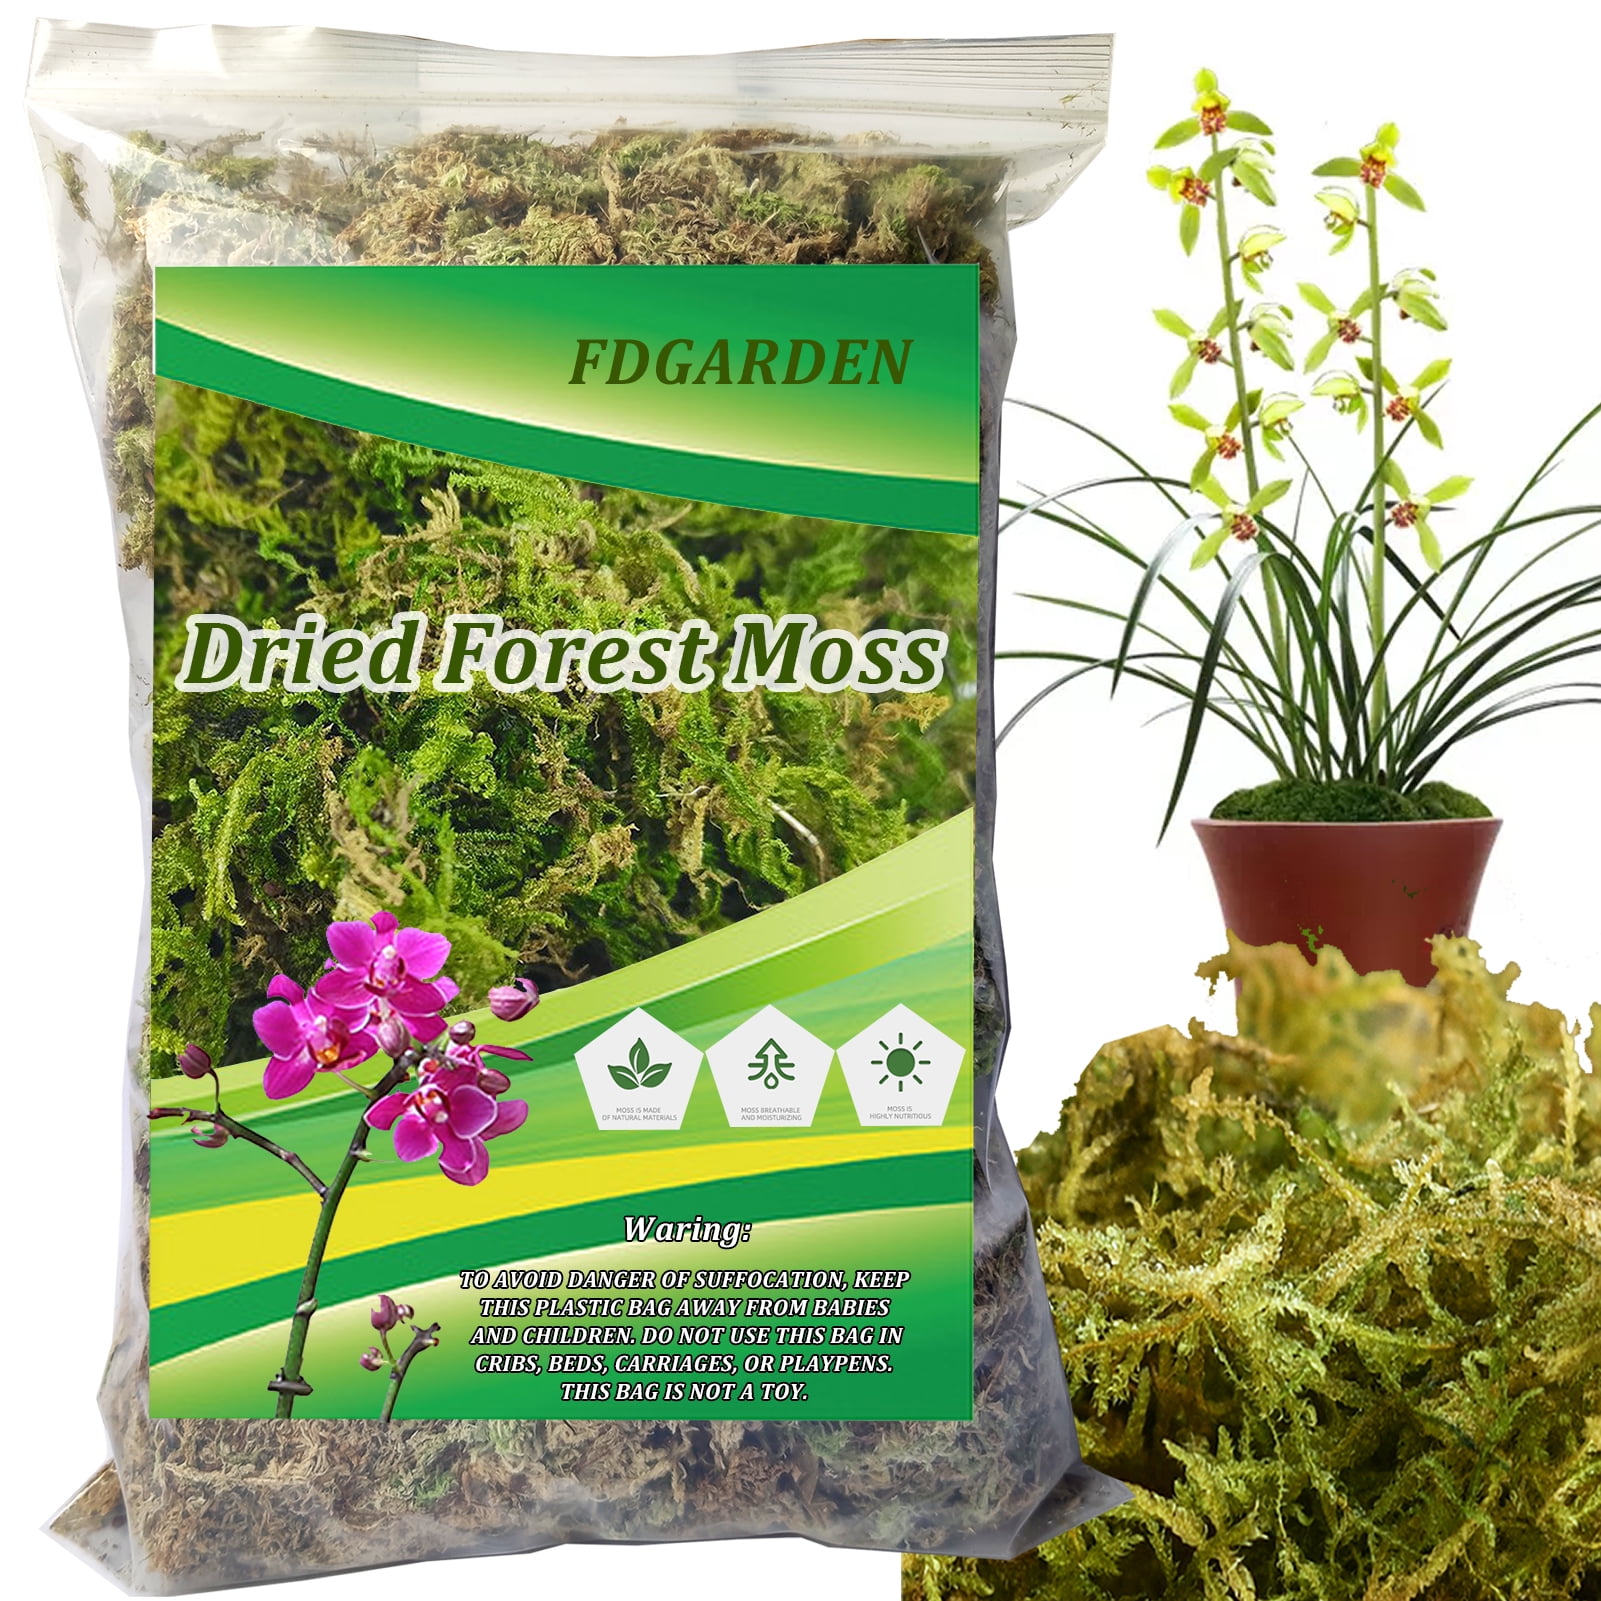 FDGARDEN Sphagnum Moss for Plant Long Fiber Dried Forest Moss for Orchid Moss Potting Mix Natural Plant Moss for Carnivorous Plants Succulent Reptile (2.6